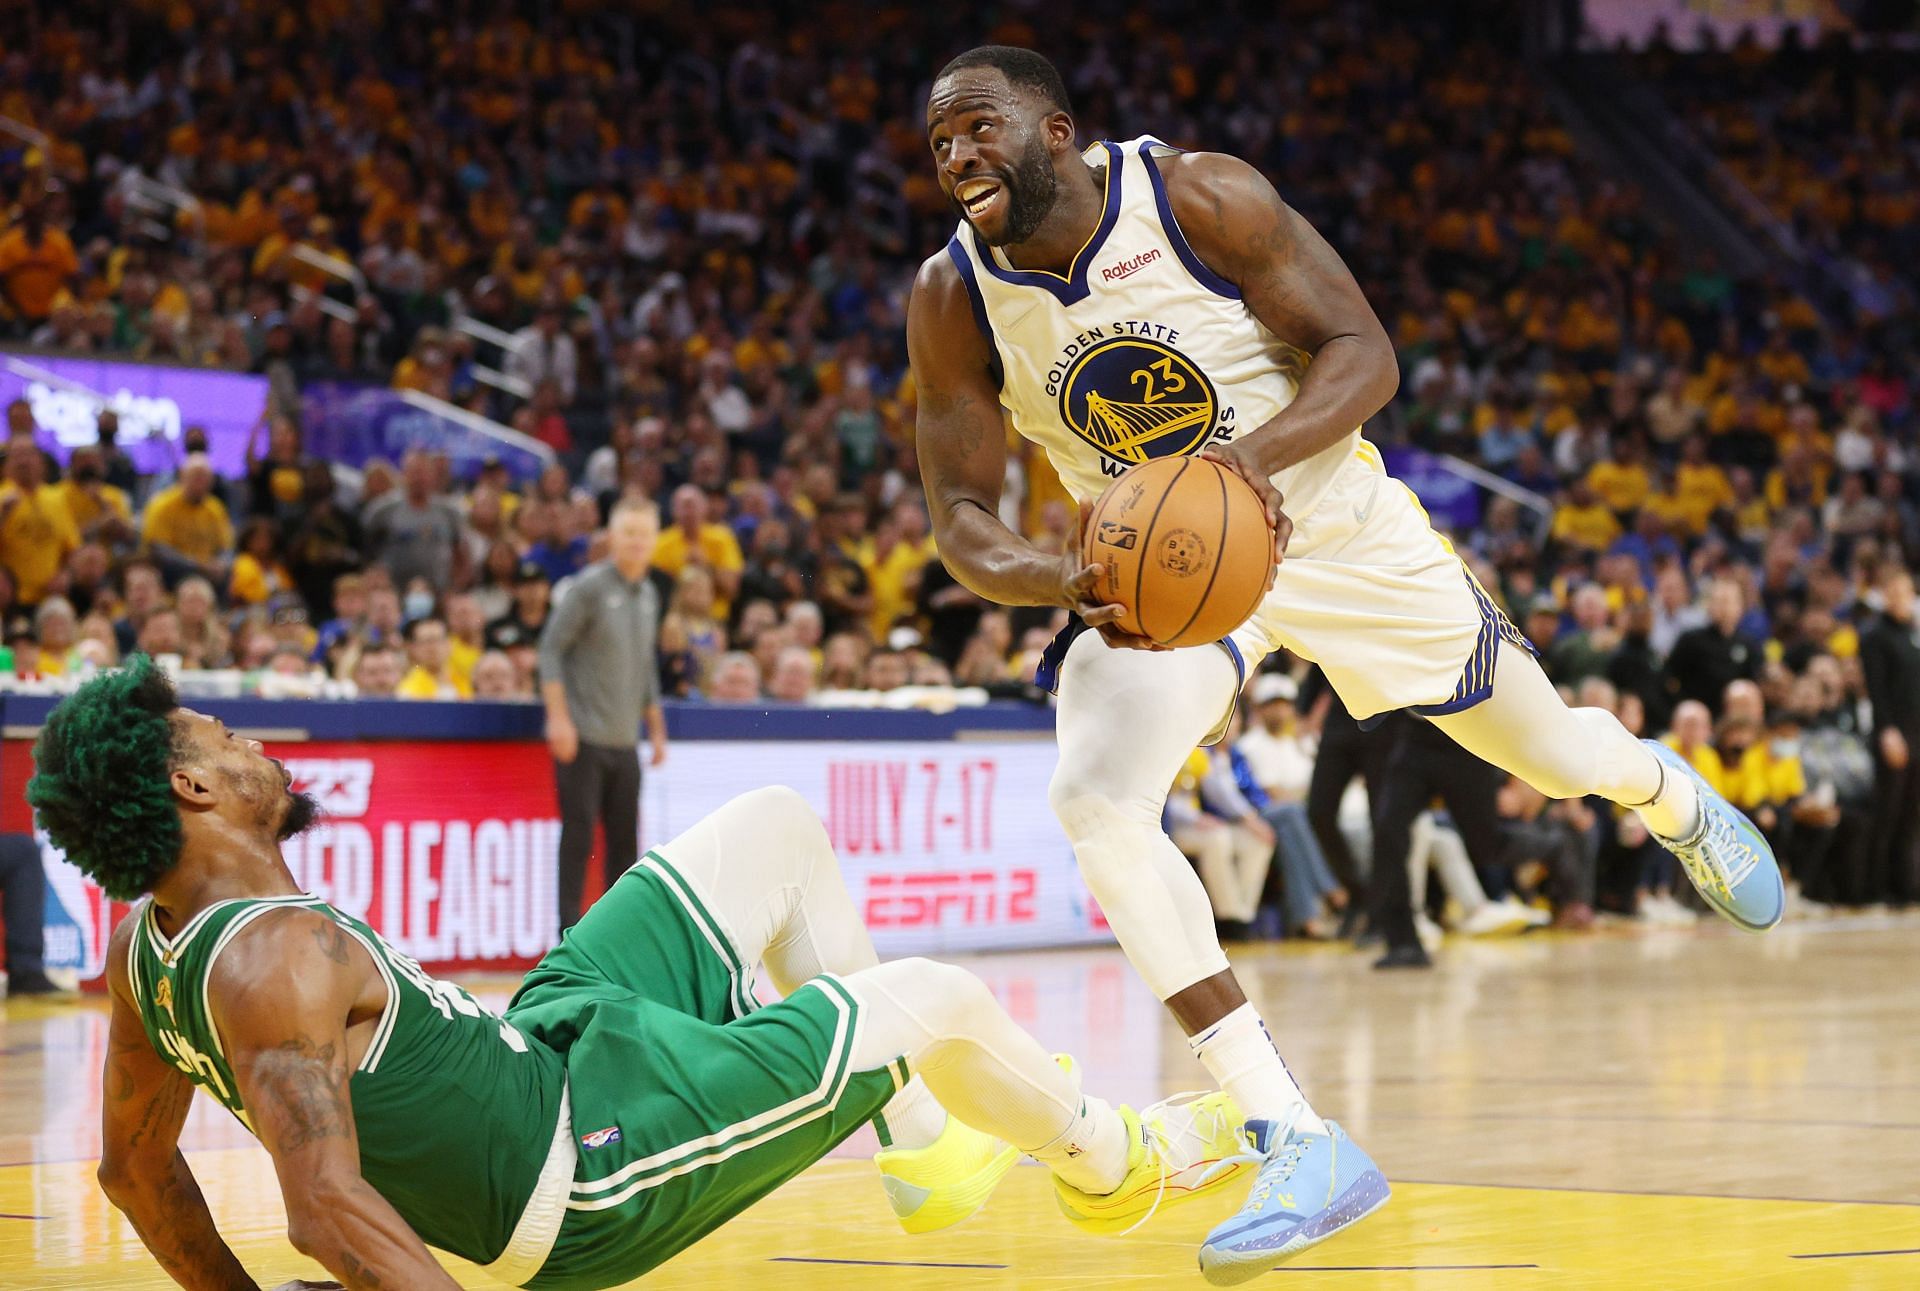 Green was nearly ejected from Game 2 of the NBA Finals. [Image Credit: Getty Images]